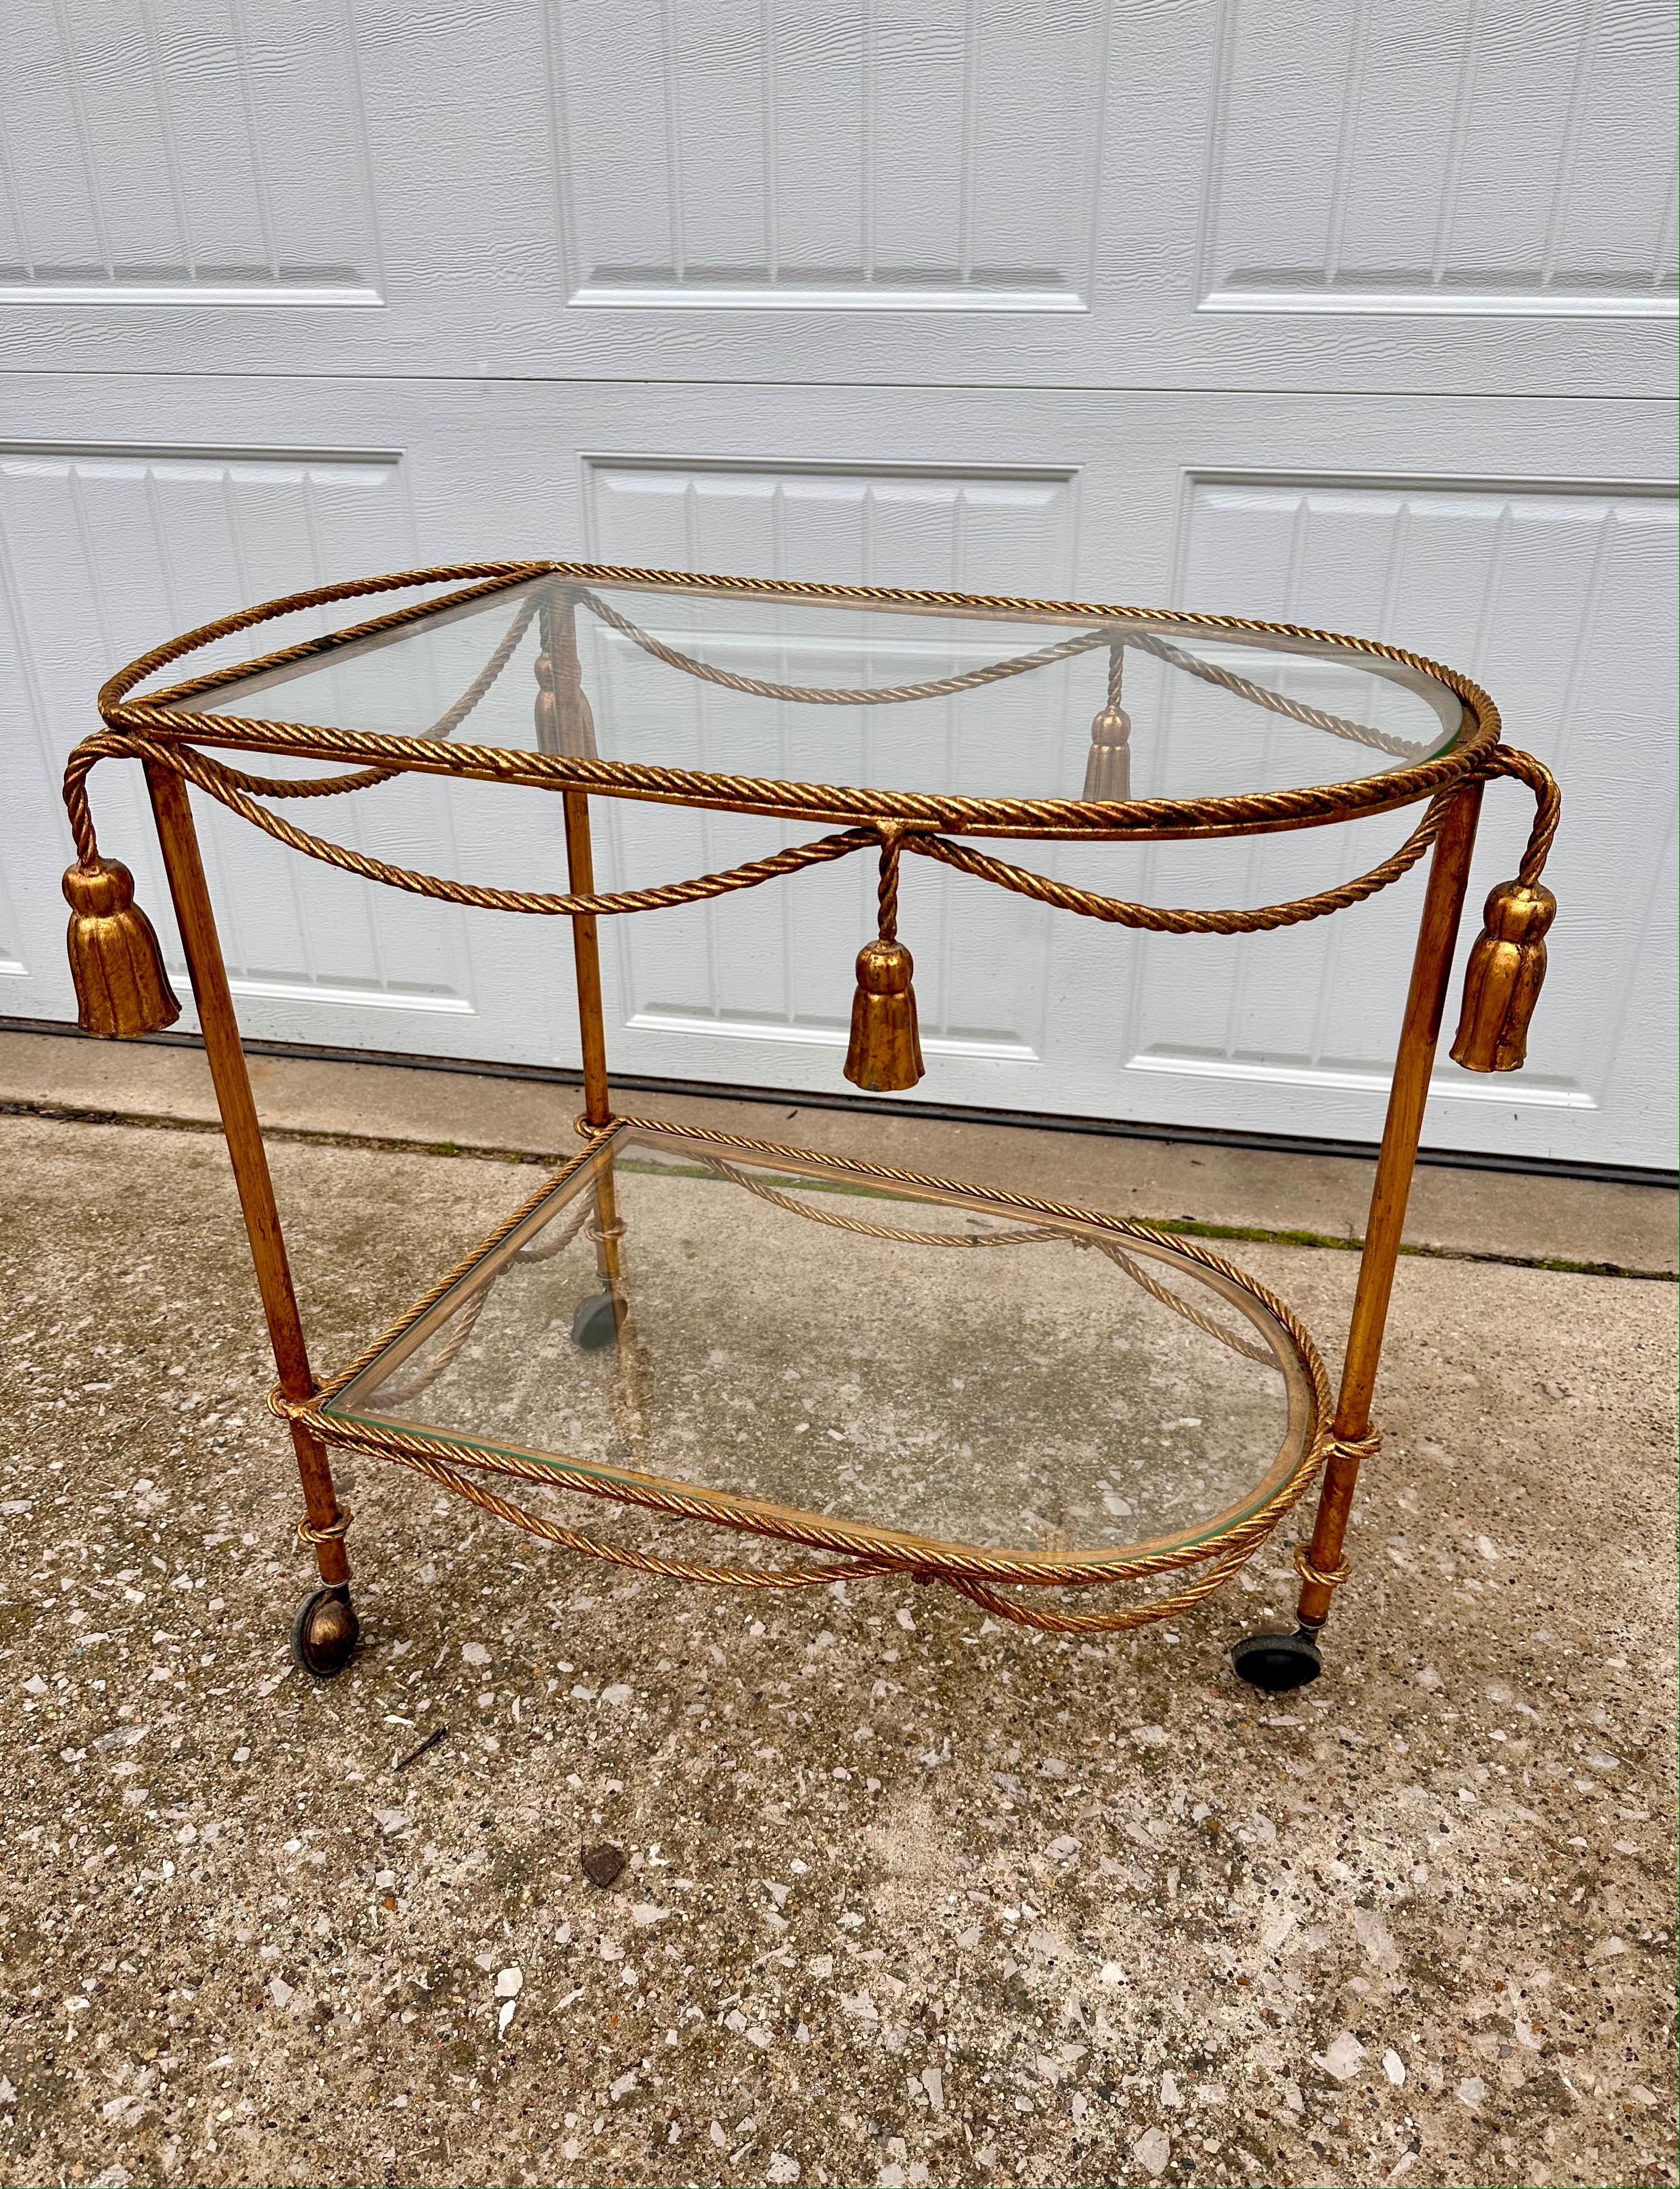 Forged 1950s Italian Gilded Two Tiered Bar Cart Hollywood Regency Style with Tassels